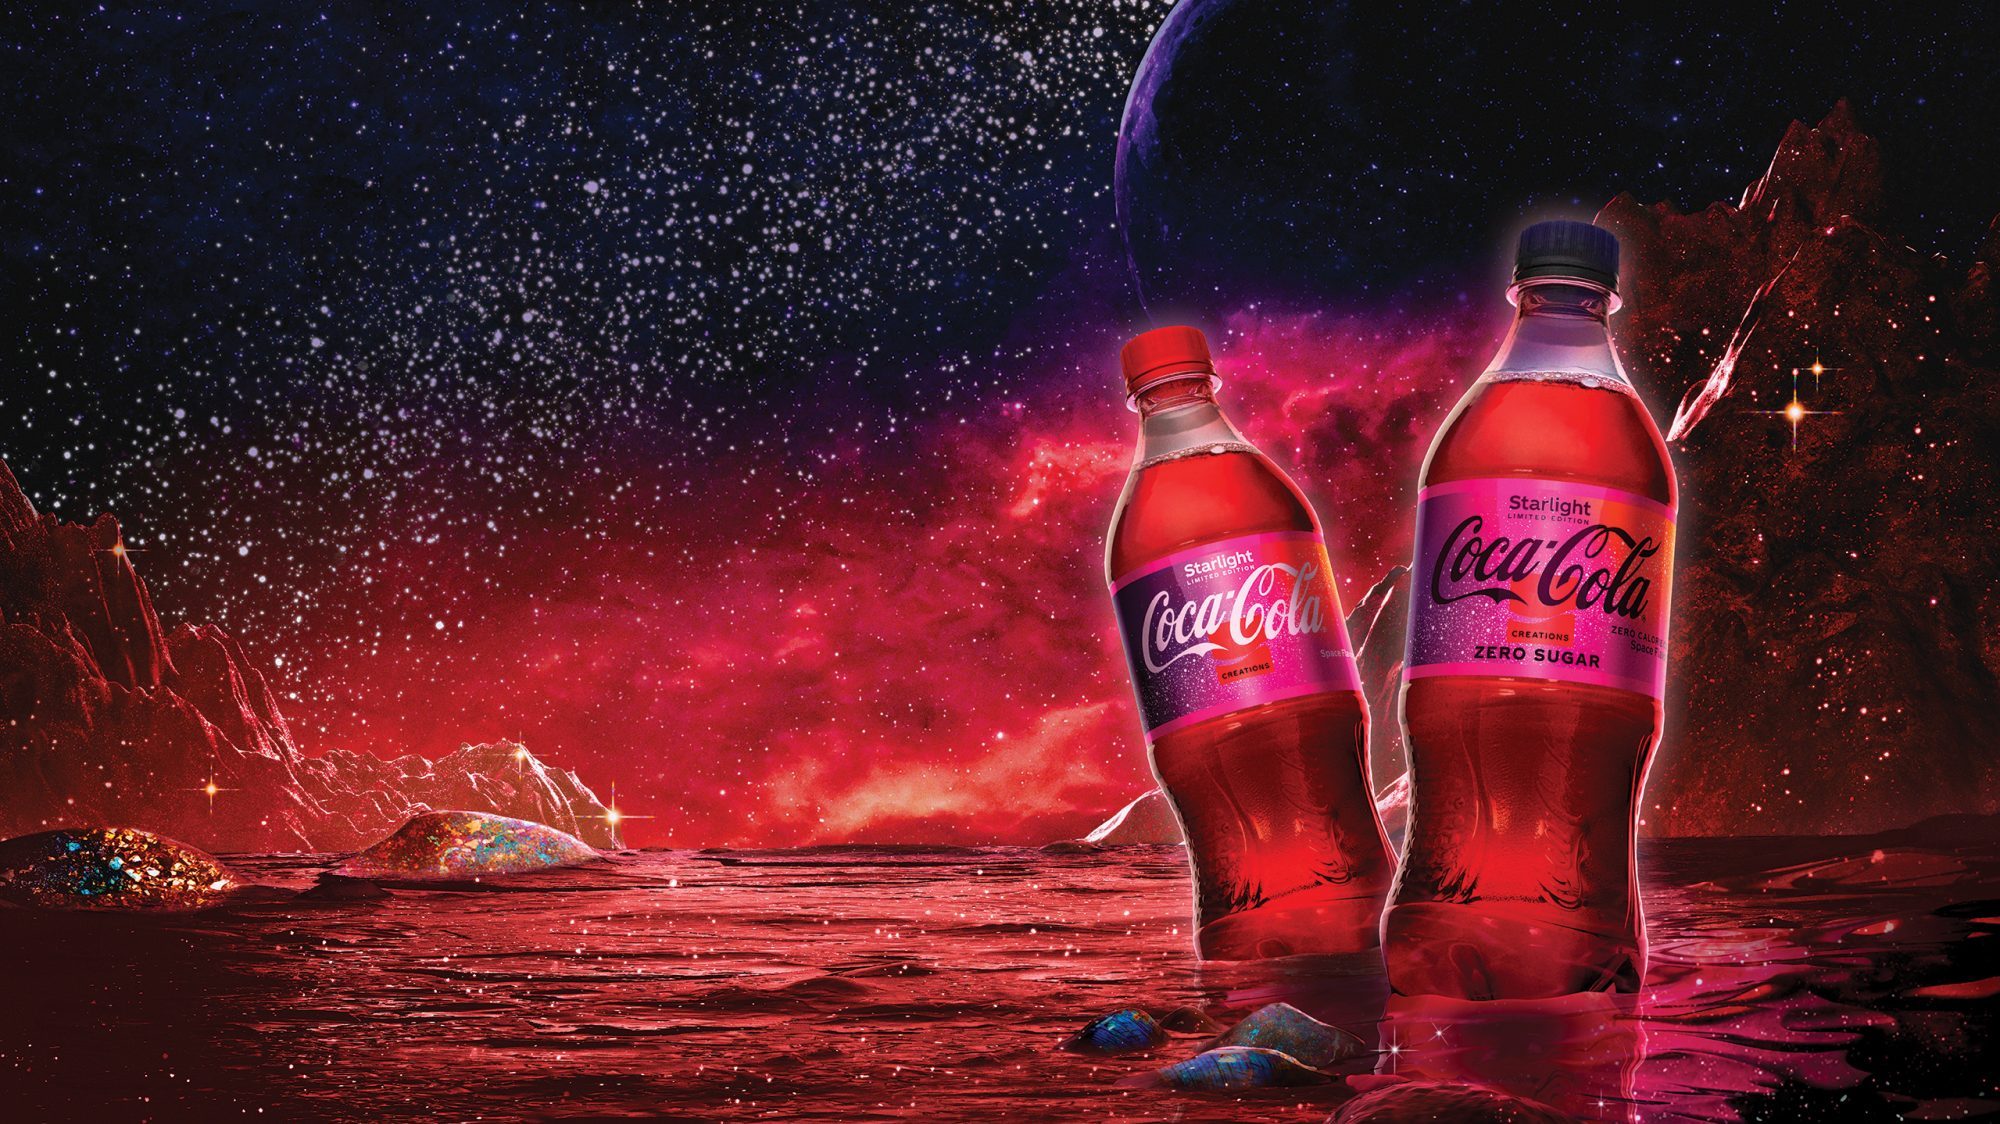 Coca-Cola Launches Starlight, a New-to-Earth 'Space-Flavored' Beverage